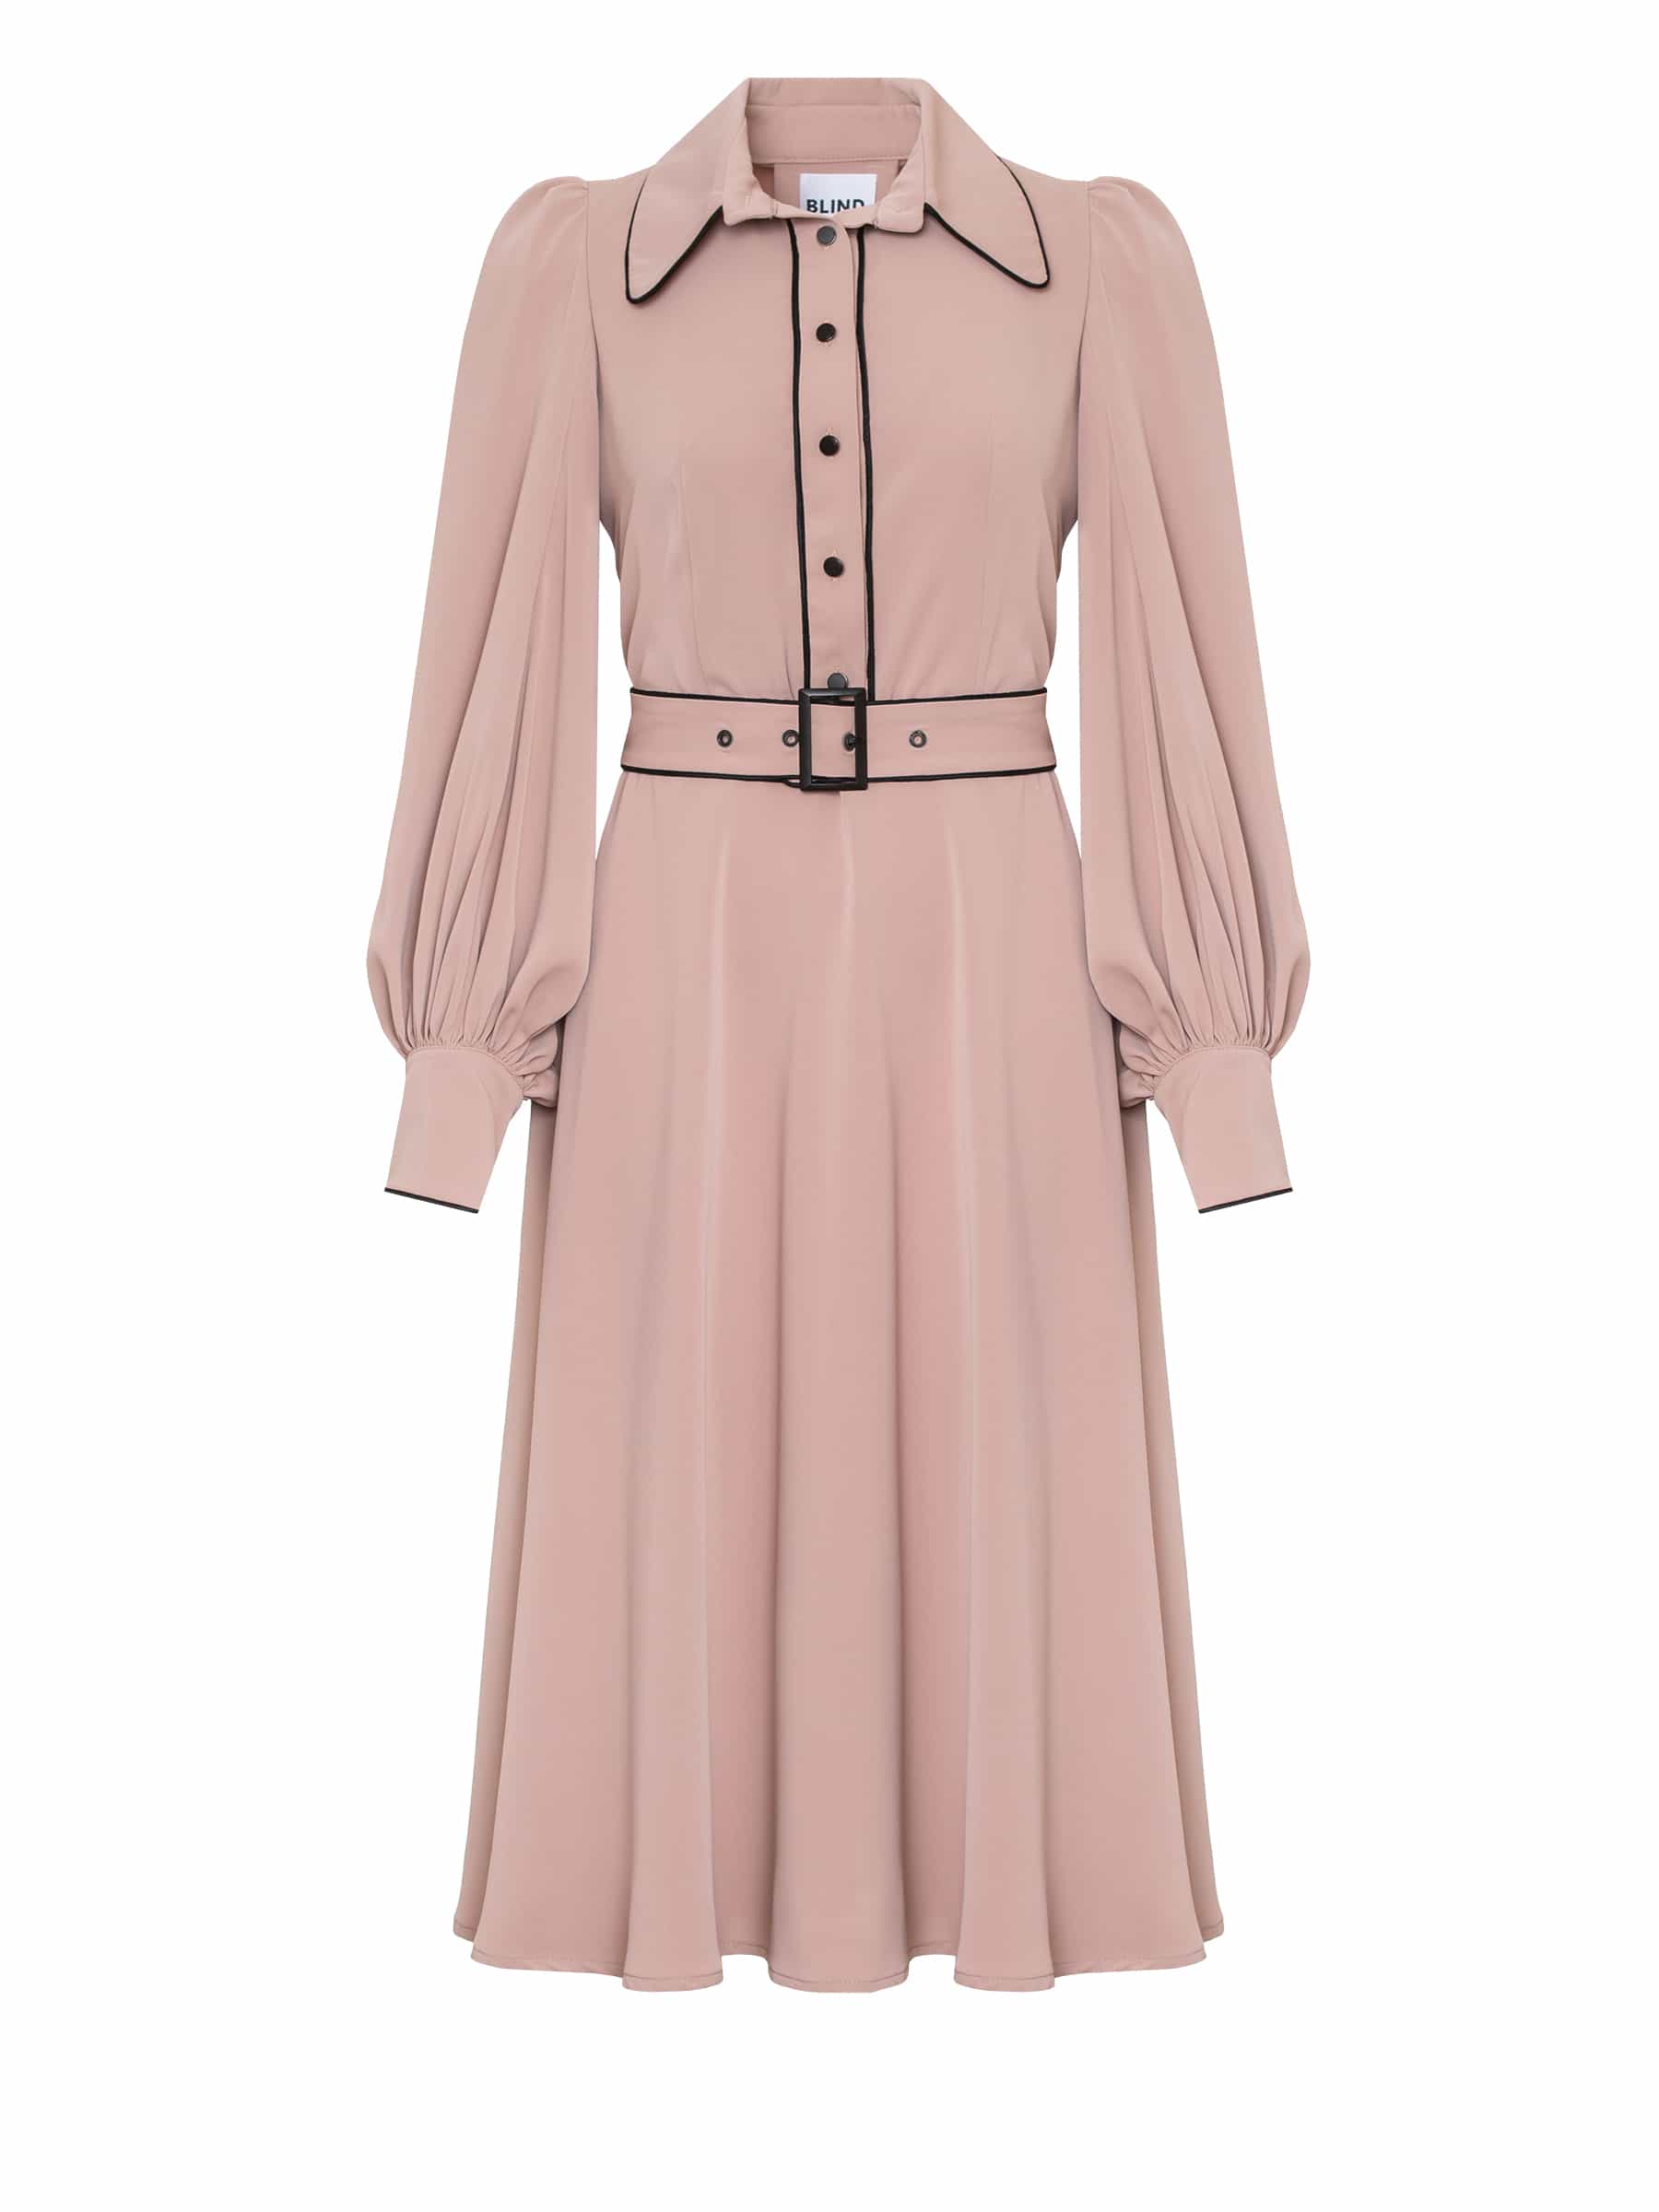 Beige dress trimmed with black silk edging with a belt on a black metal buckle